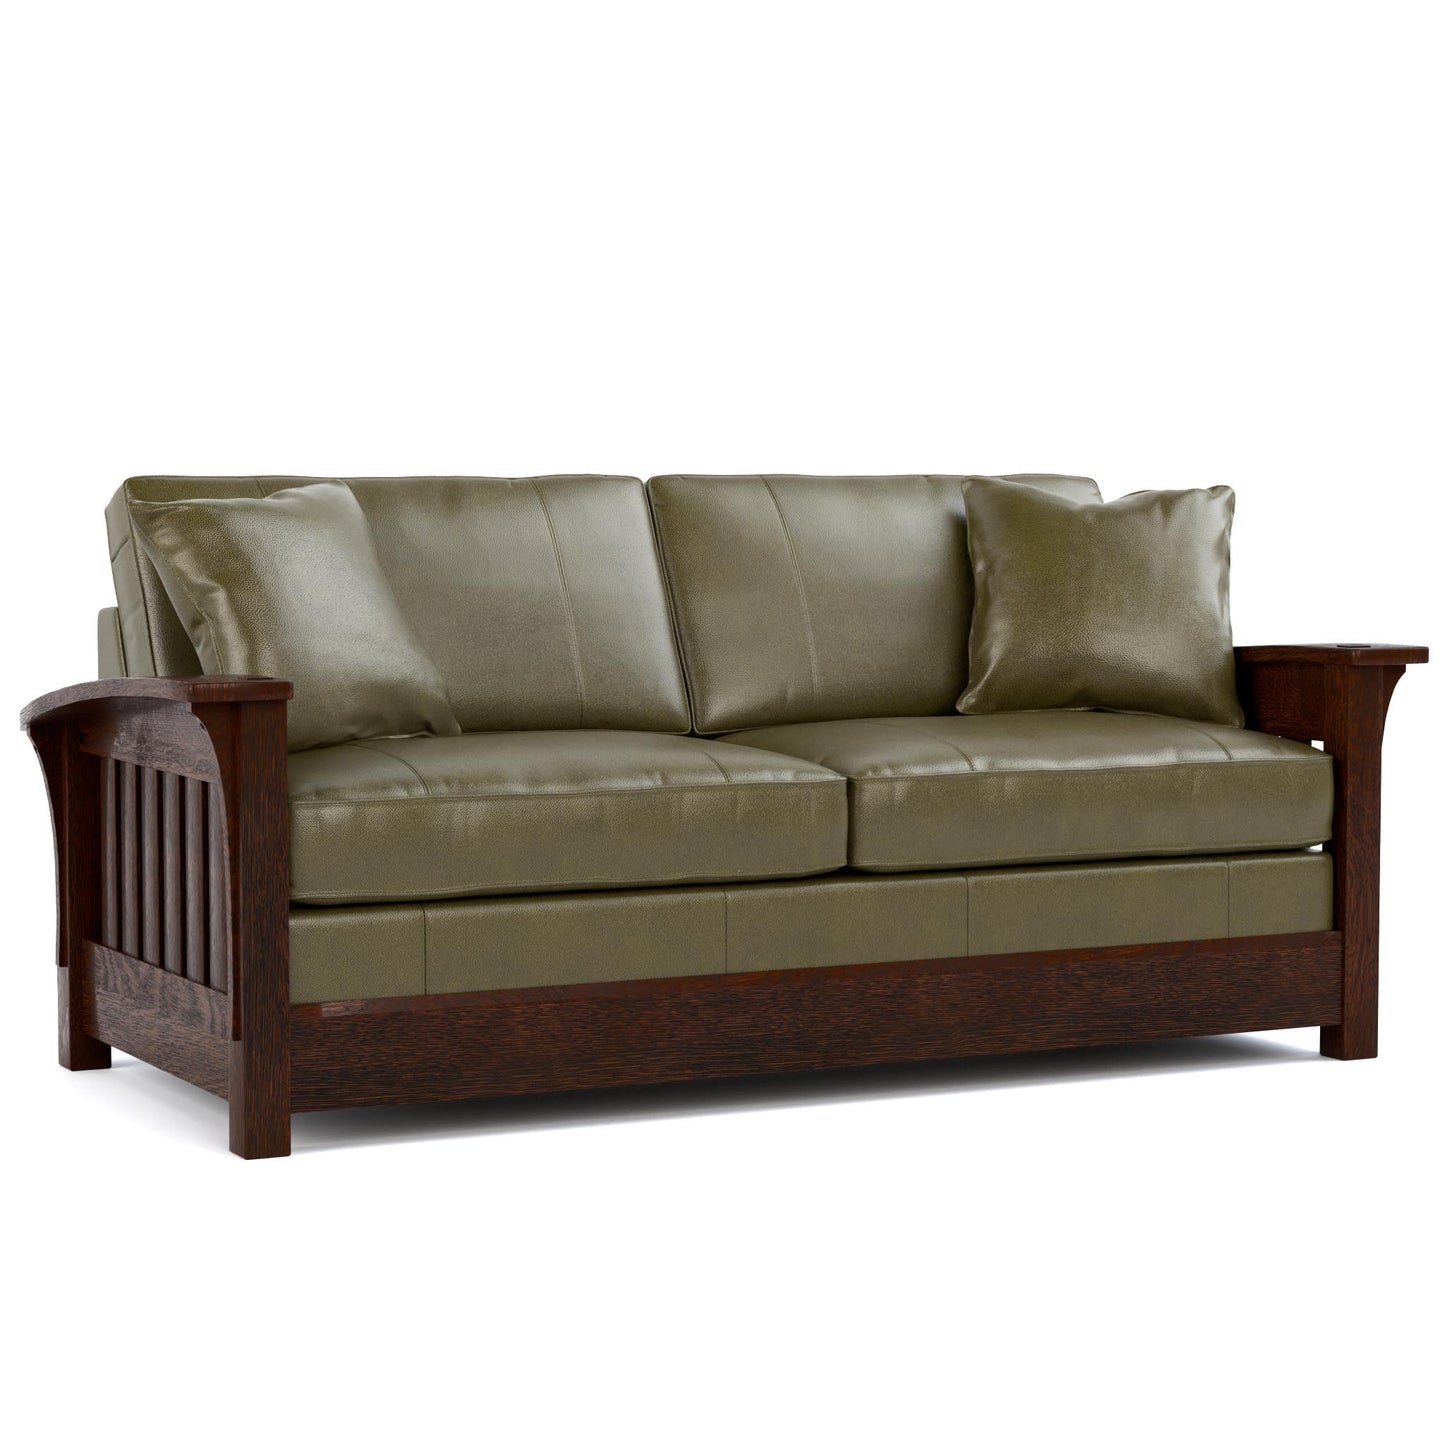 Orchard Street Sofa Bed Colman Olive Leather 031 - Centennial Finish